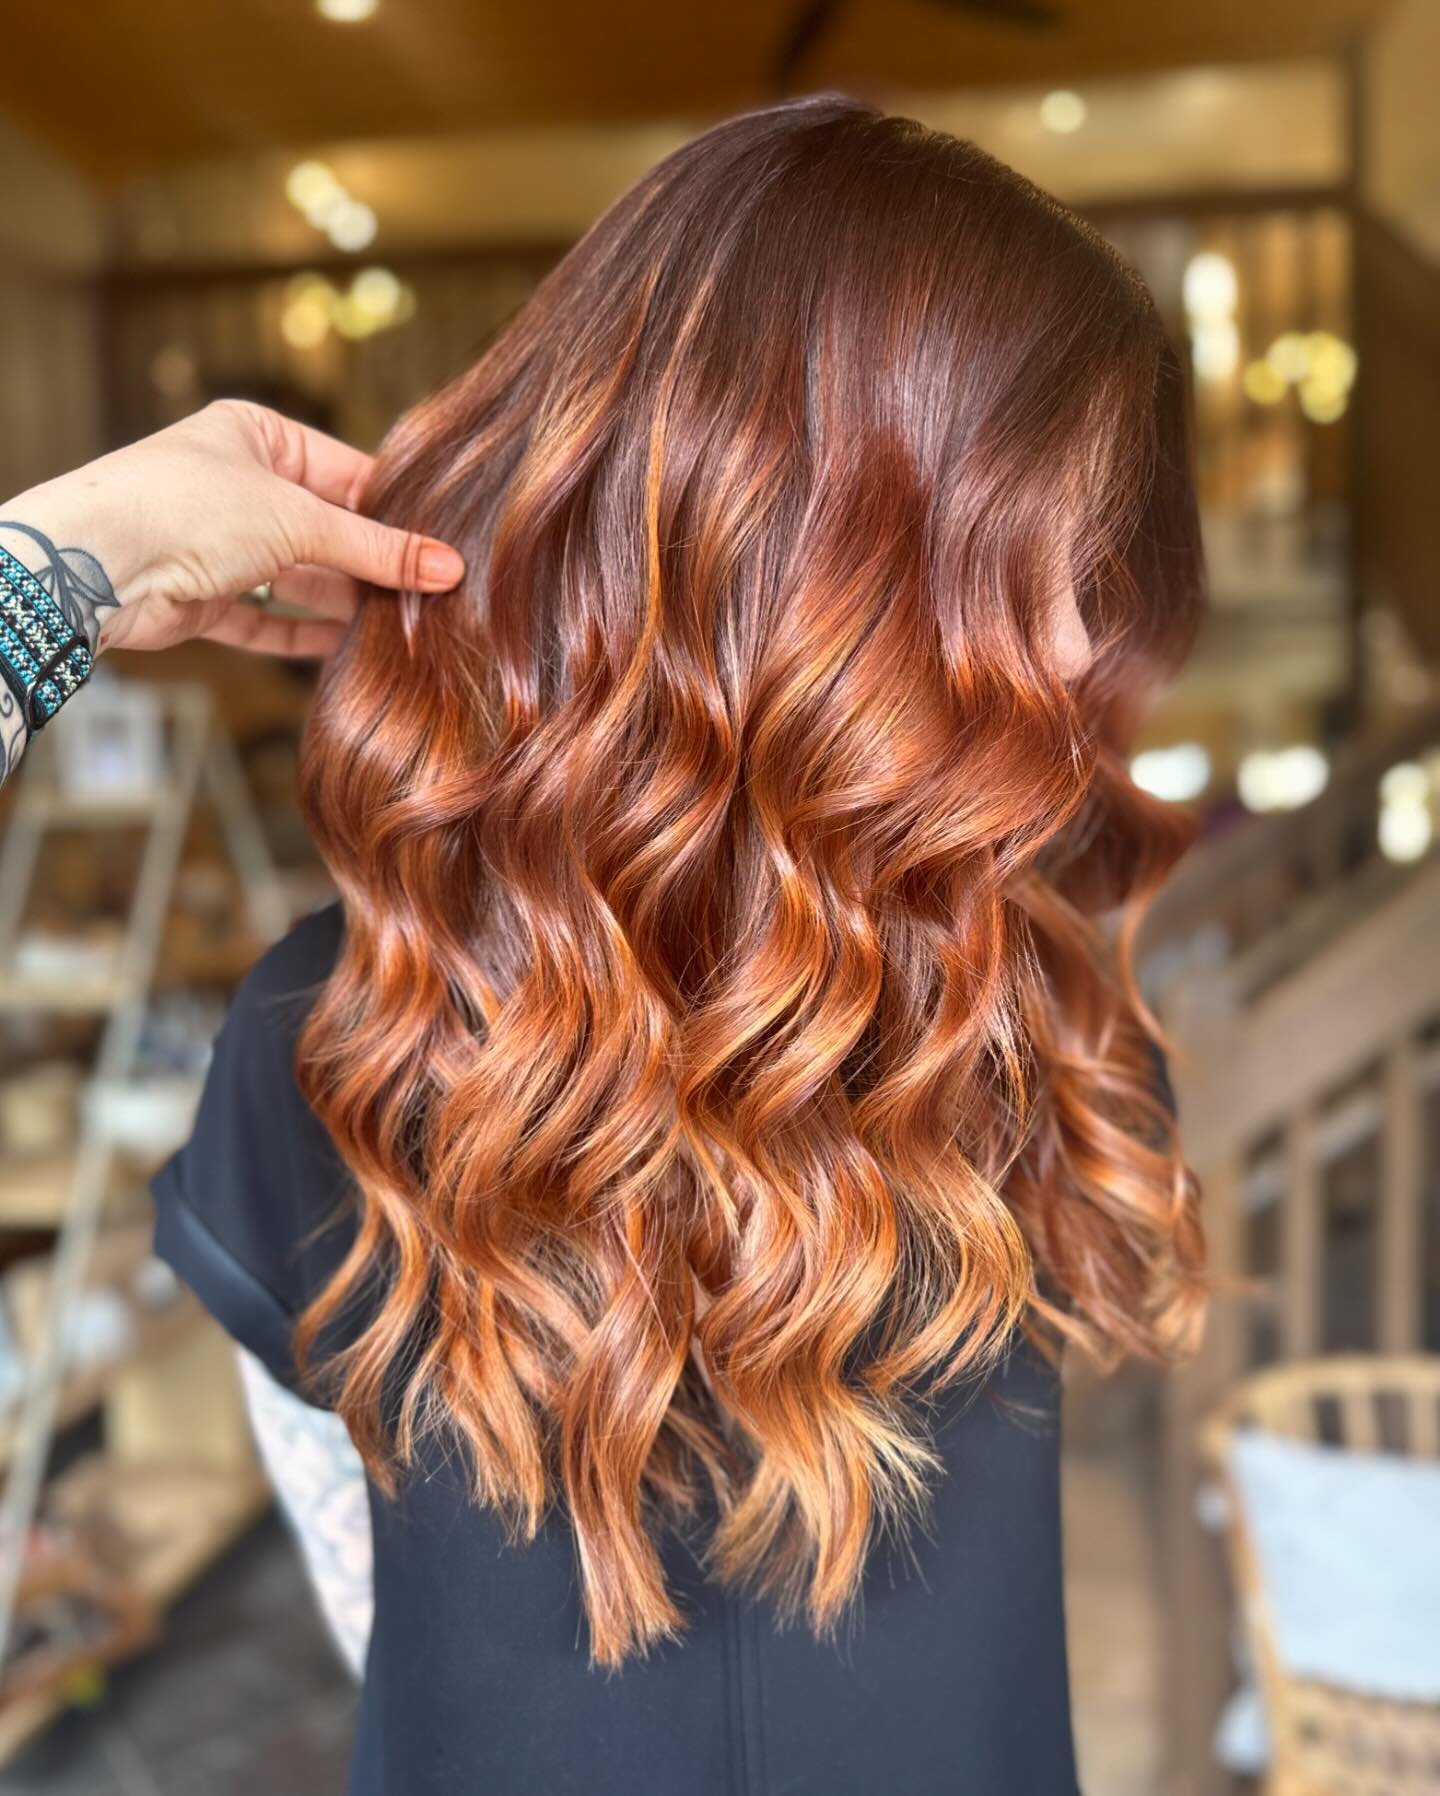 Absolutely JAW-DROPPING red BY @jesssuthhair 
✽
✽
✽
✽
✽
Roots Beauty Studio 
115 Linden Street, Fort Collins 
970.484.2119
𝑪𝒂𝒍𝒍 𝒐𝒓 𝒈𝒐 𝒐𝒏𝒍𝒊𝒏𝒆 𝒕𝒐 𝒃𝒐𝒐𝒌 𝒂𝒏 𝒂𝒑𝒑𝒐𝒊𝓷𝒕𝒎𝒆𝒏𝒕